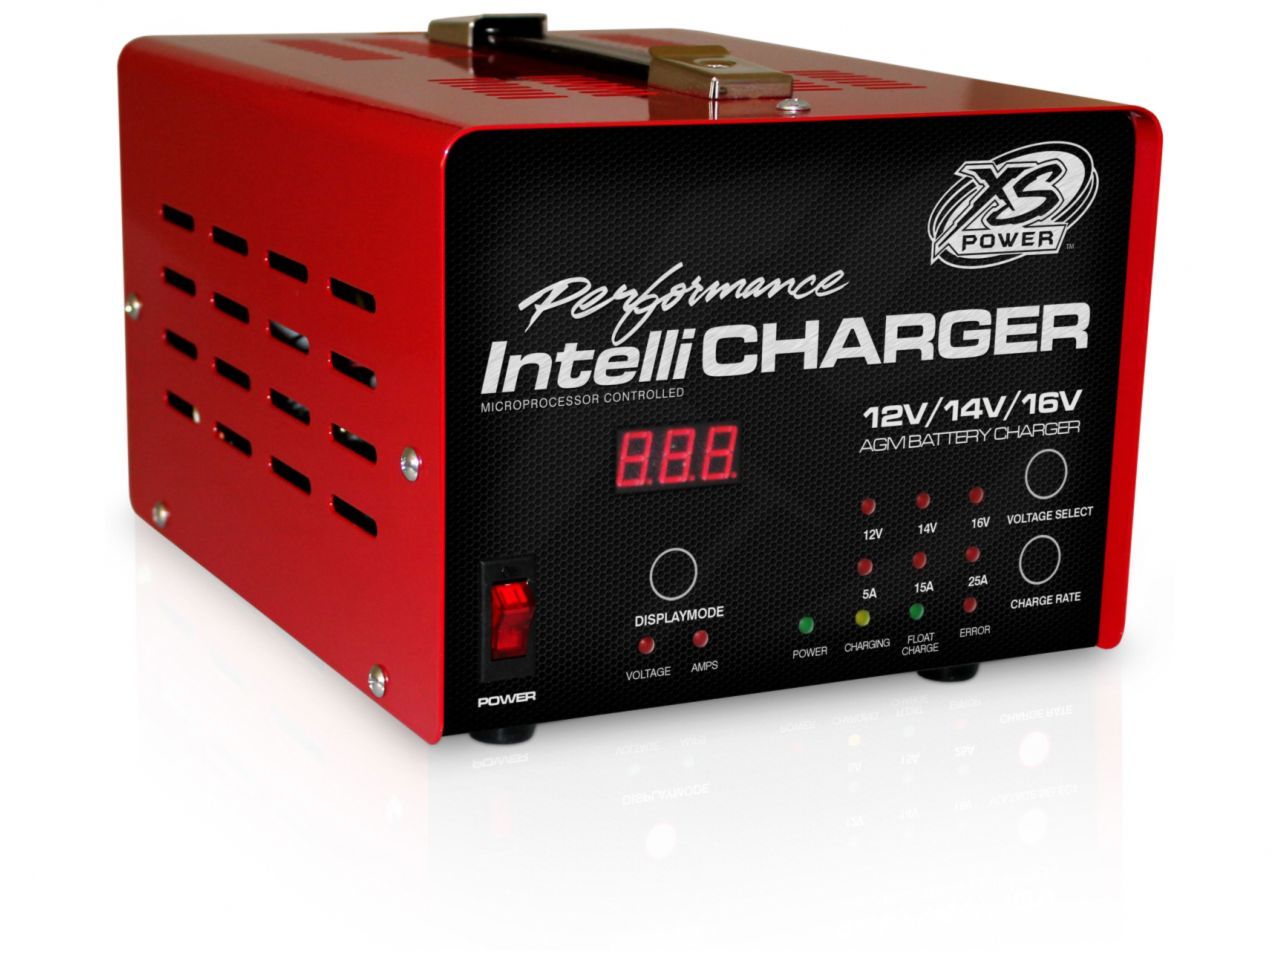 XS Power Battery Charger 1005 Item Image